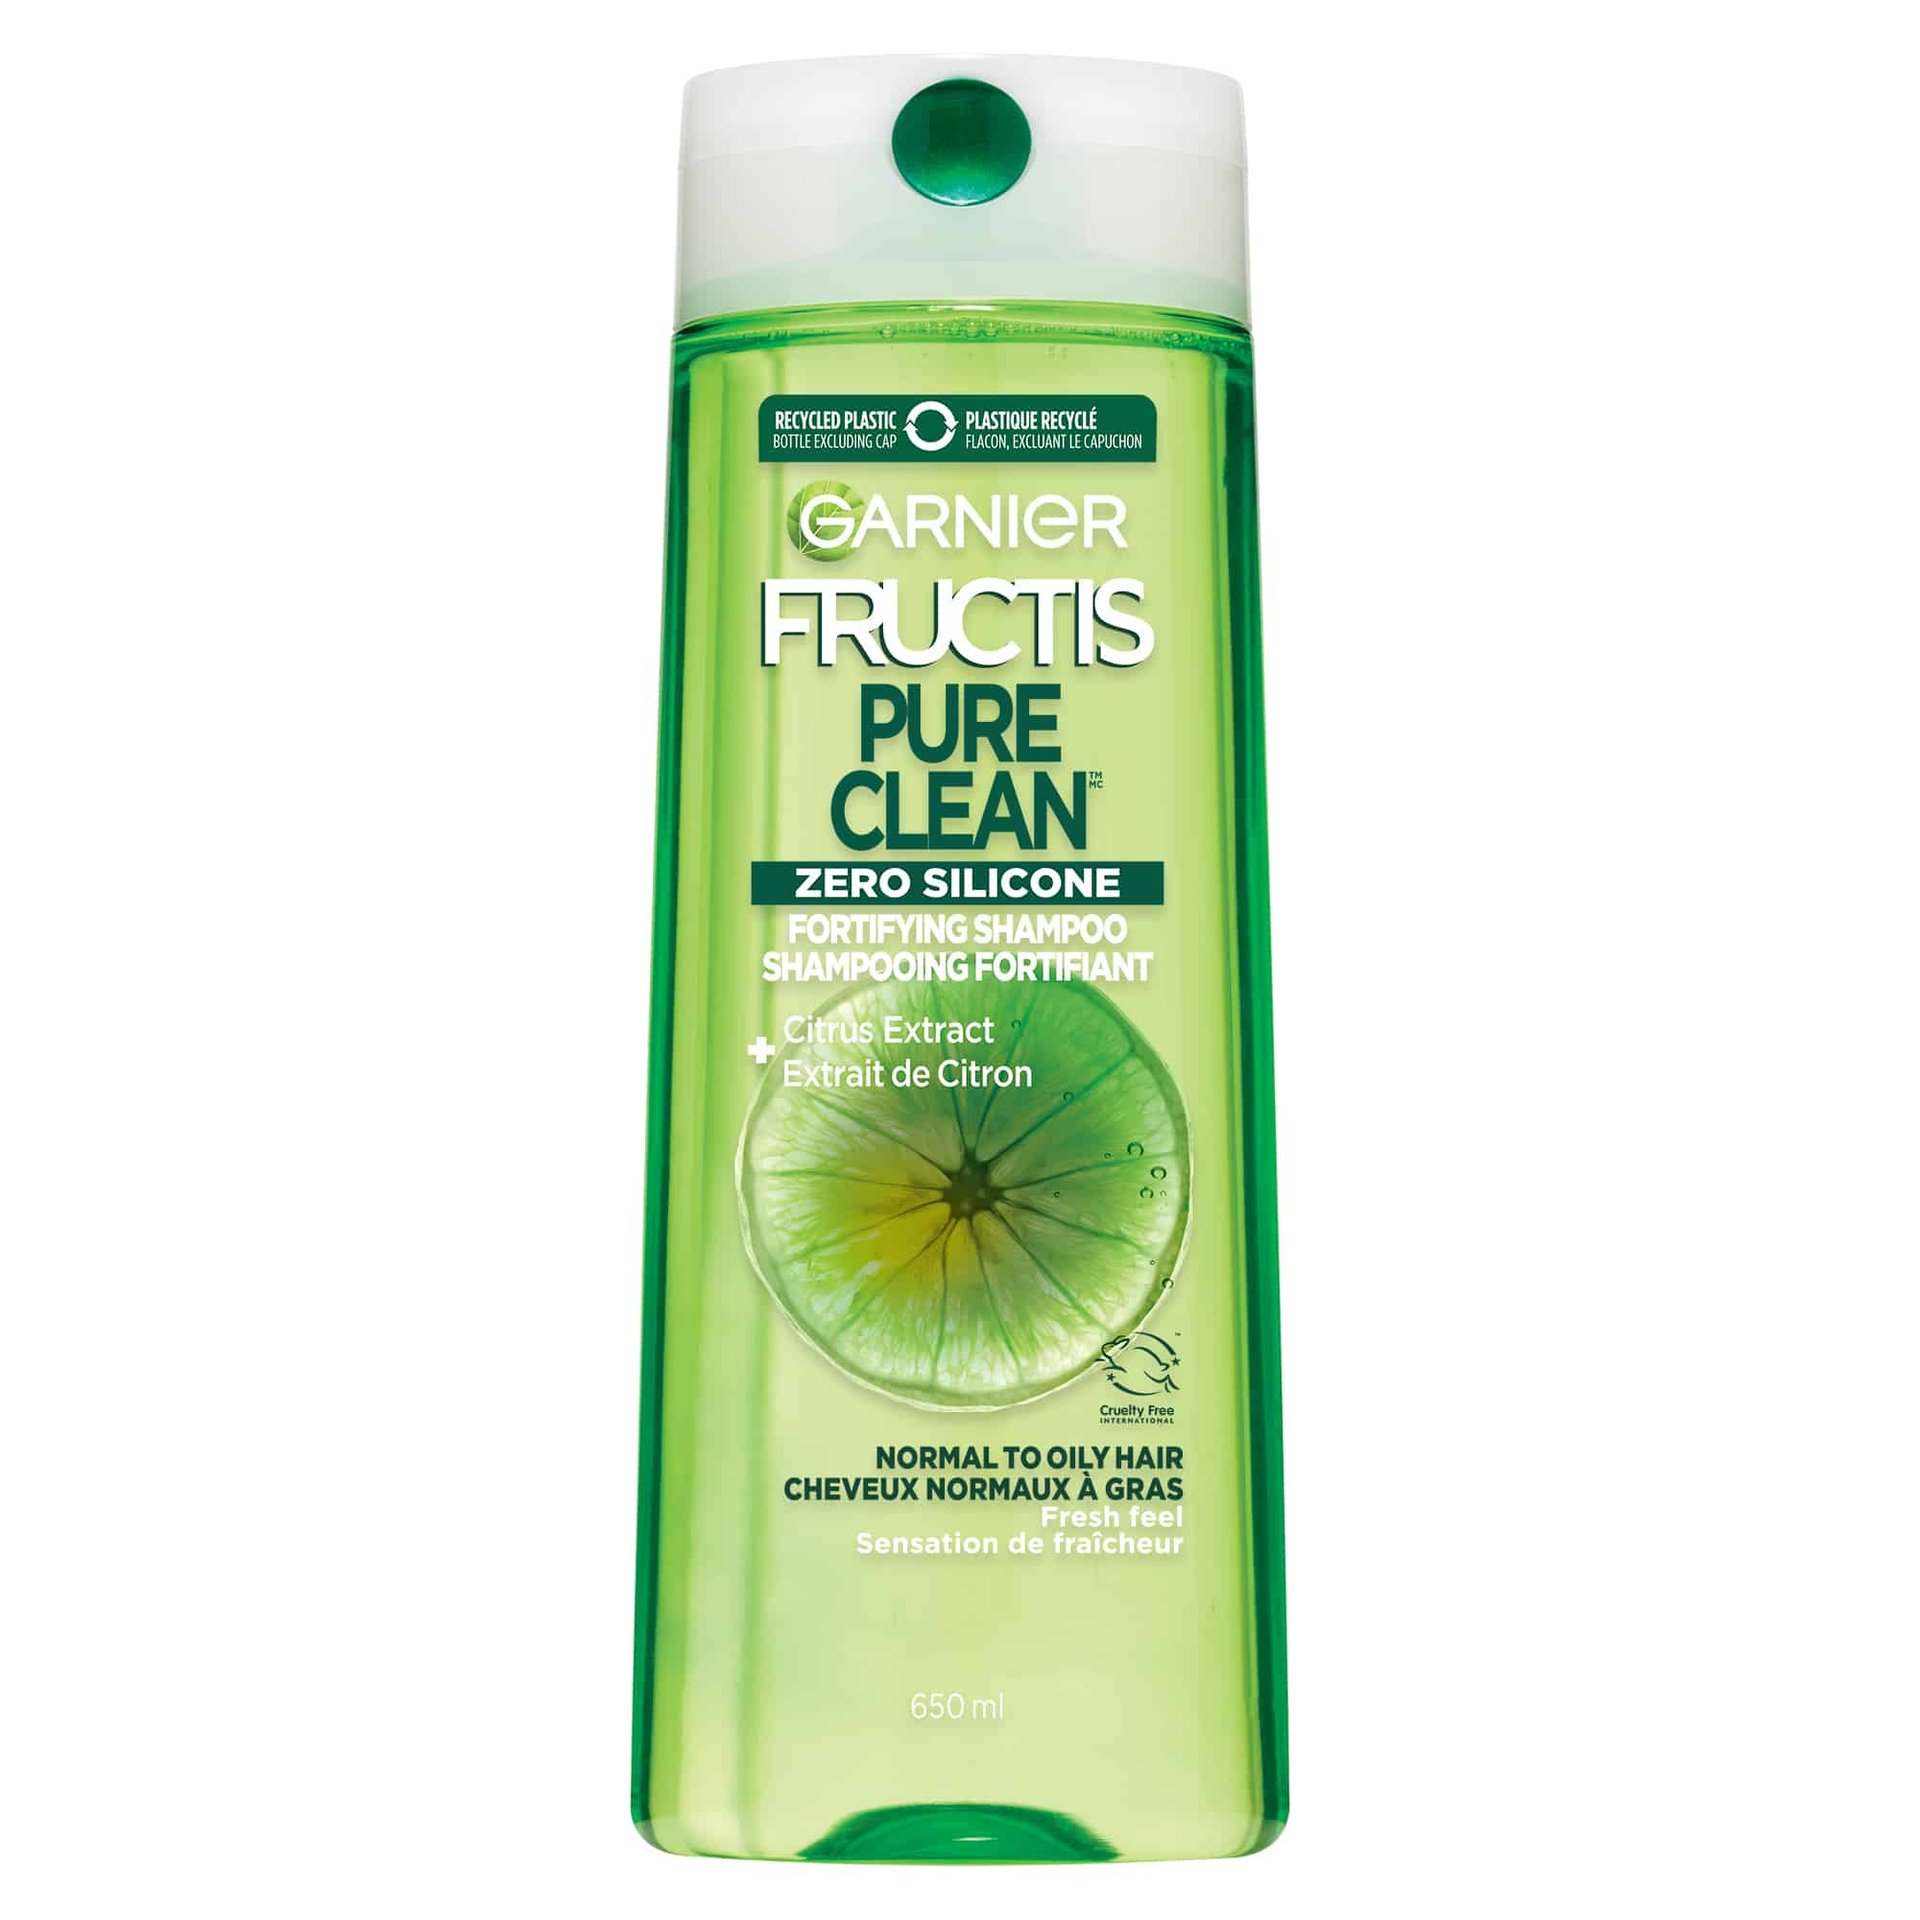 Shampoo fructis pure clean 650ml Front 603084073238